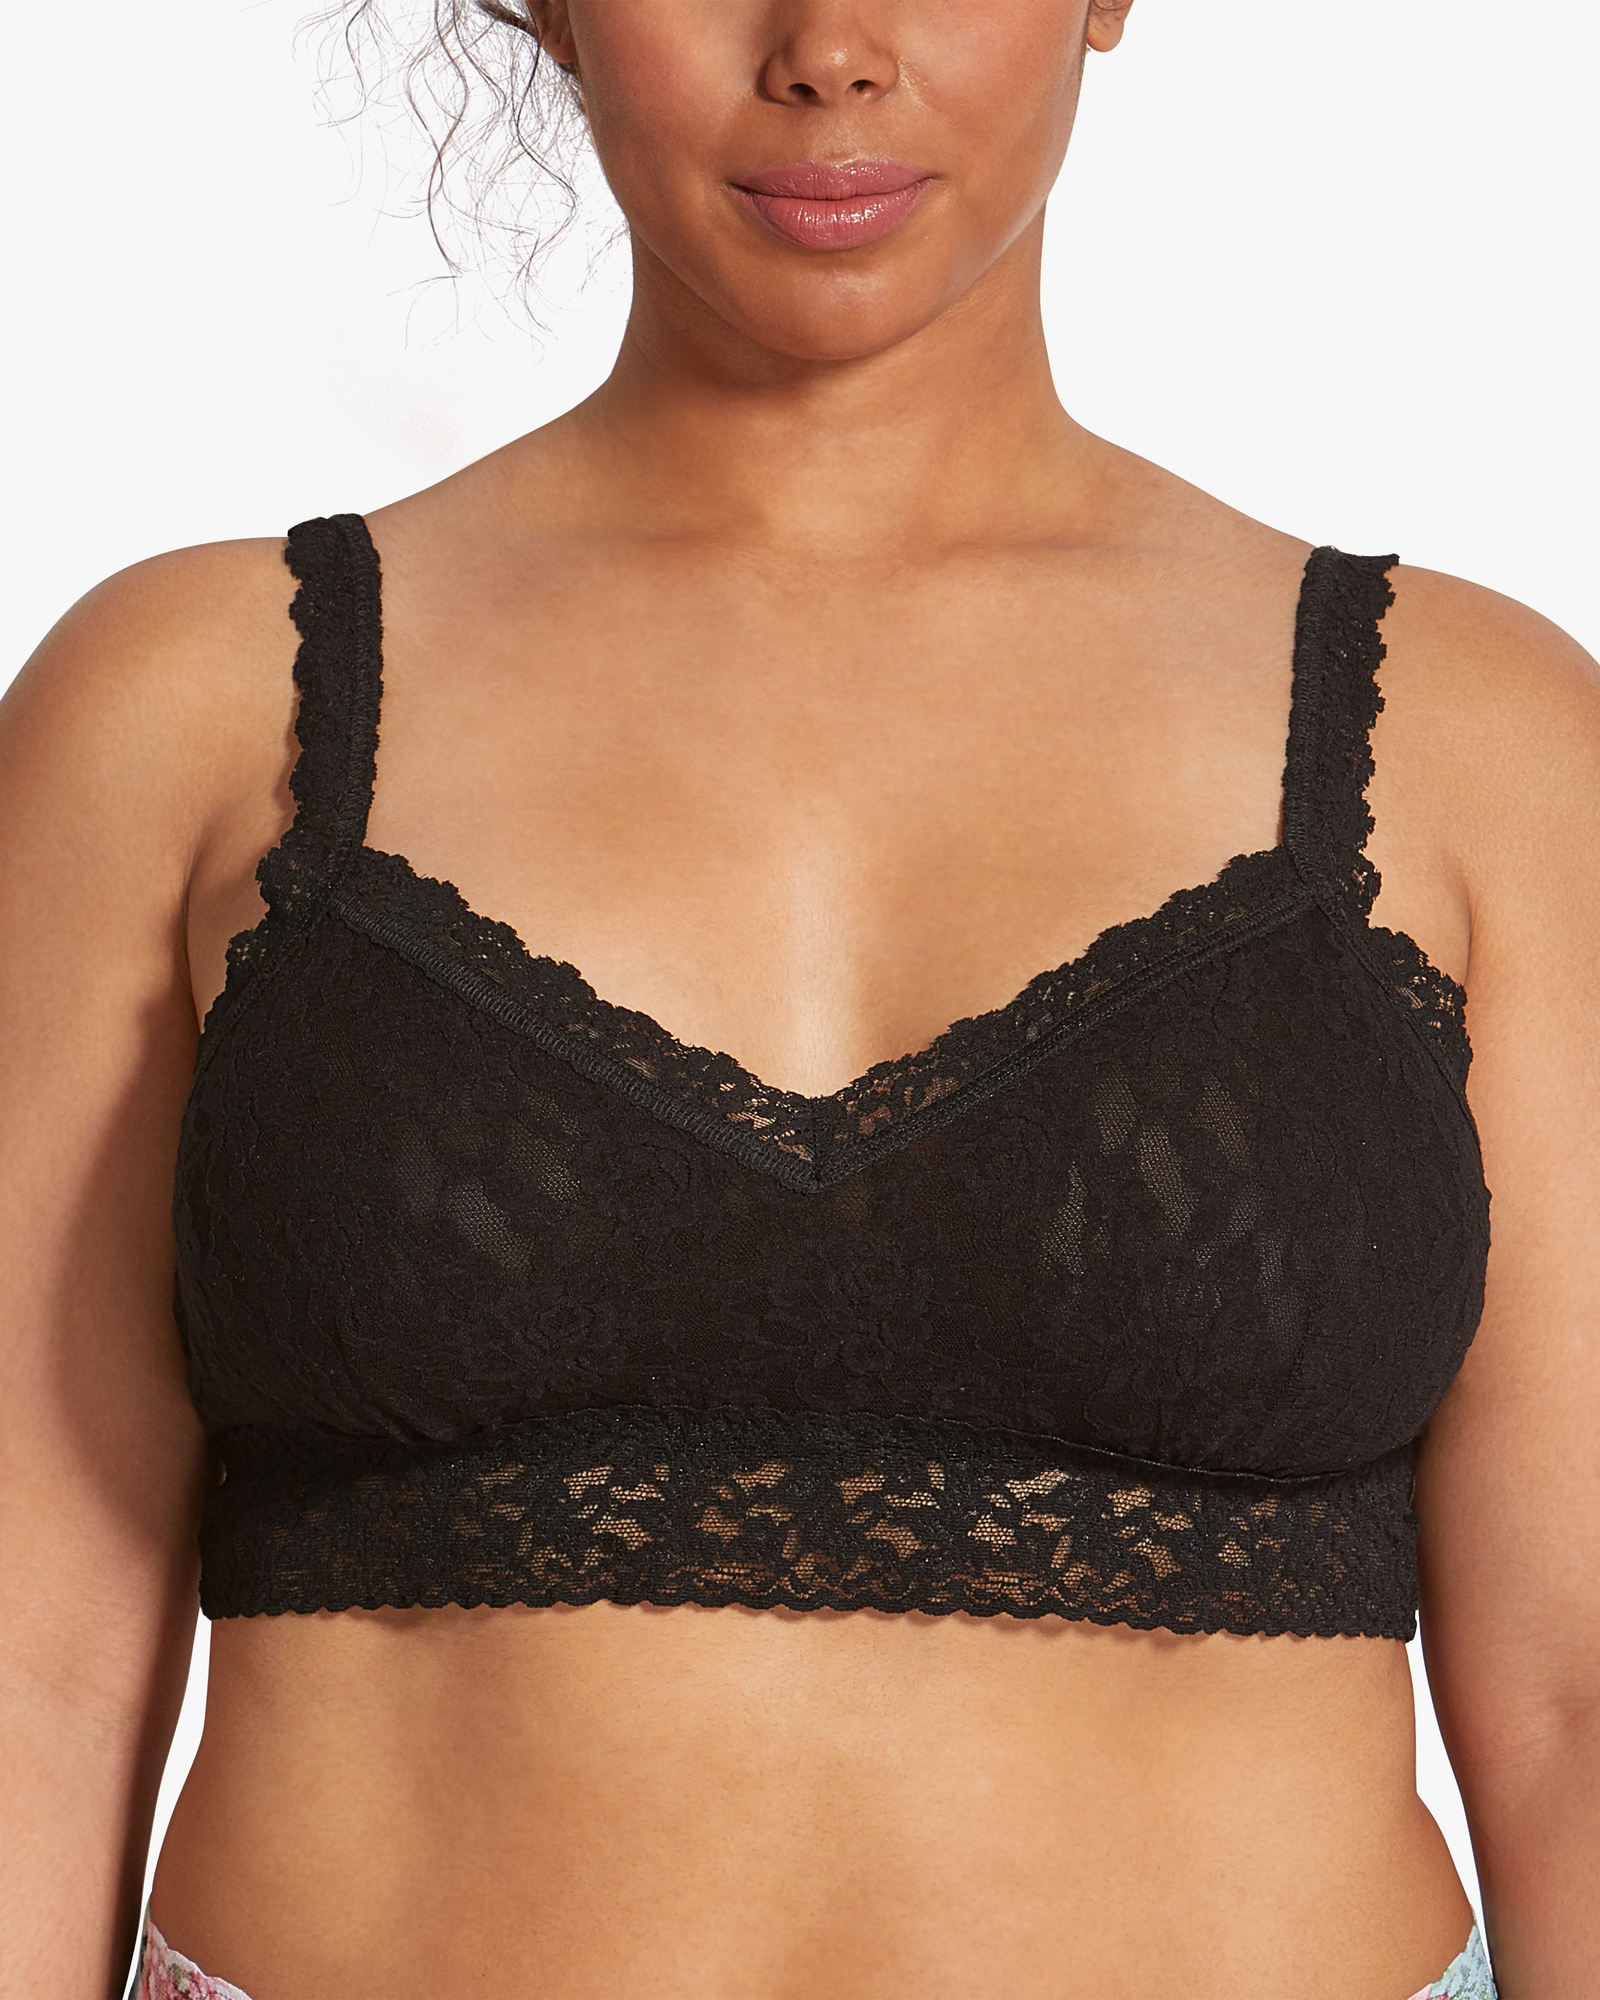 Stylish and Comfortable Lace Bralette